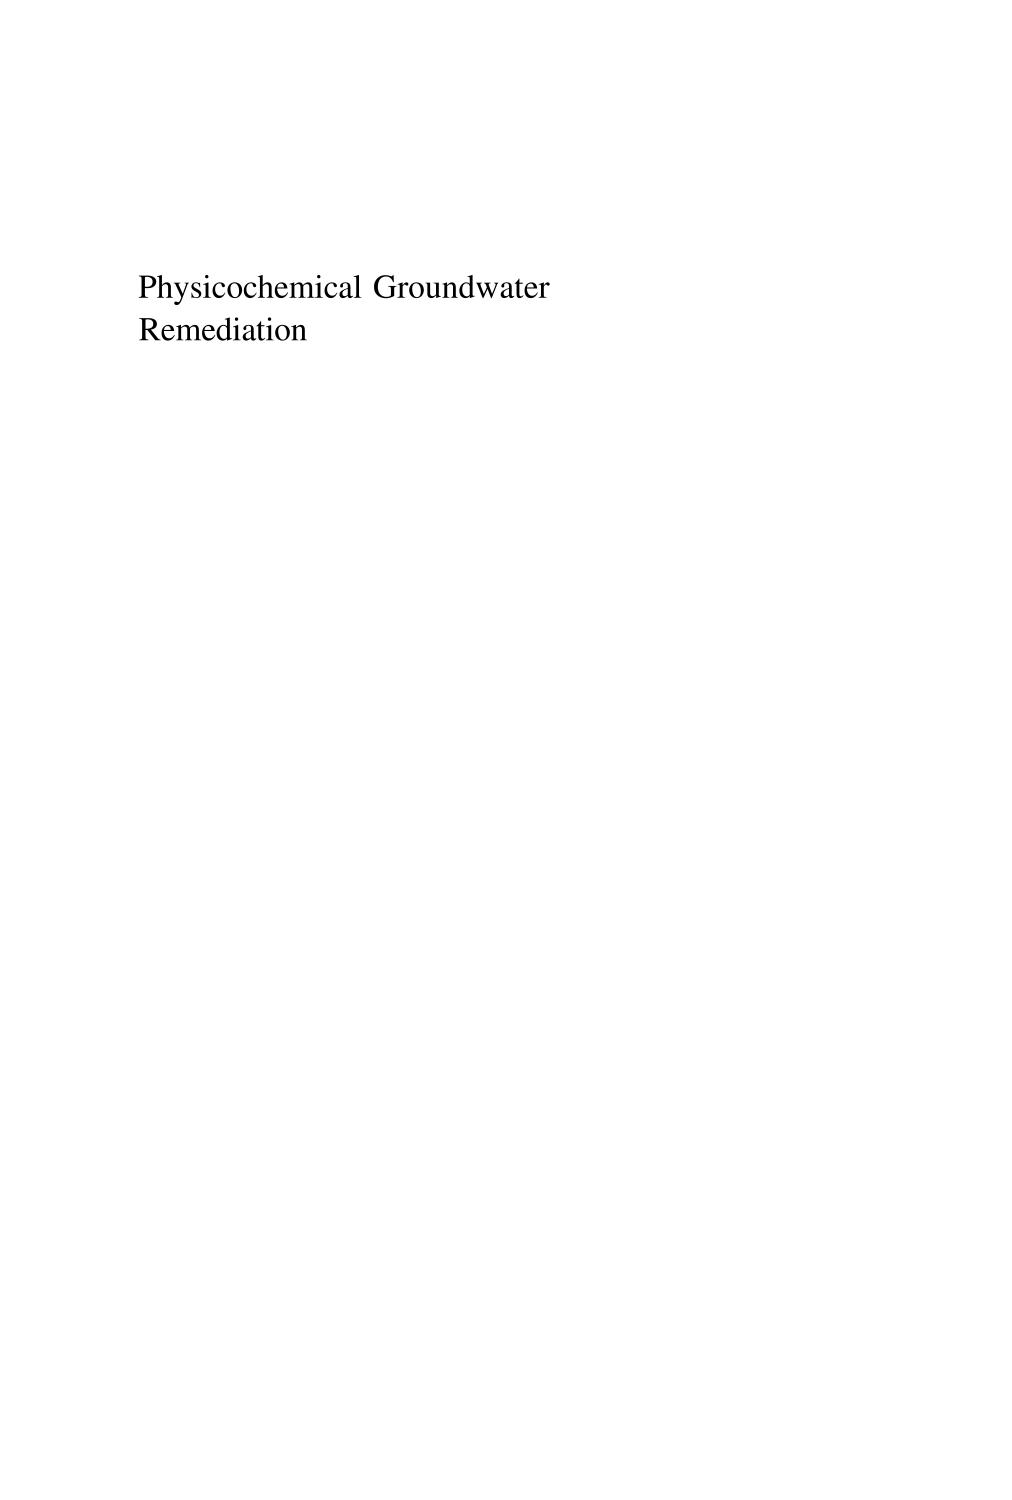 Physicochemical Groundwater Remediation